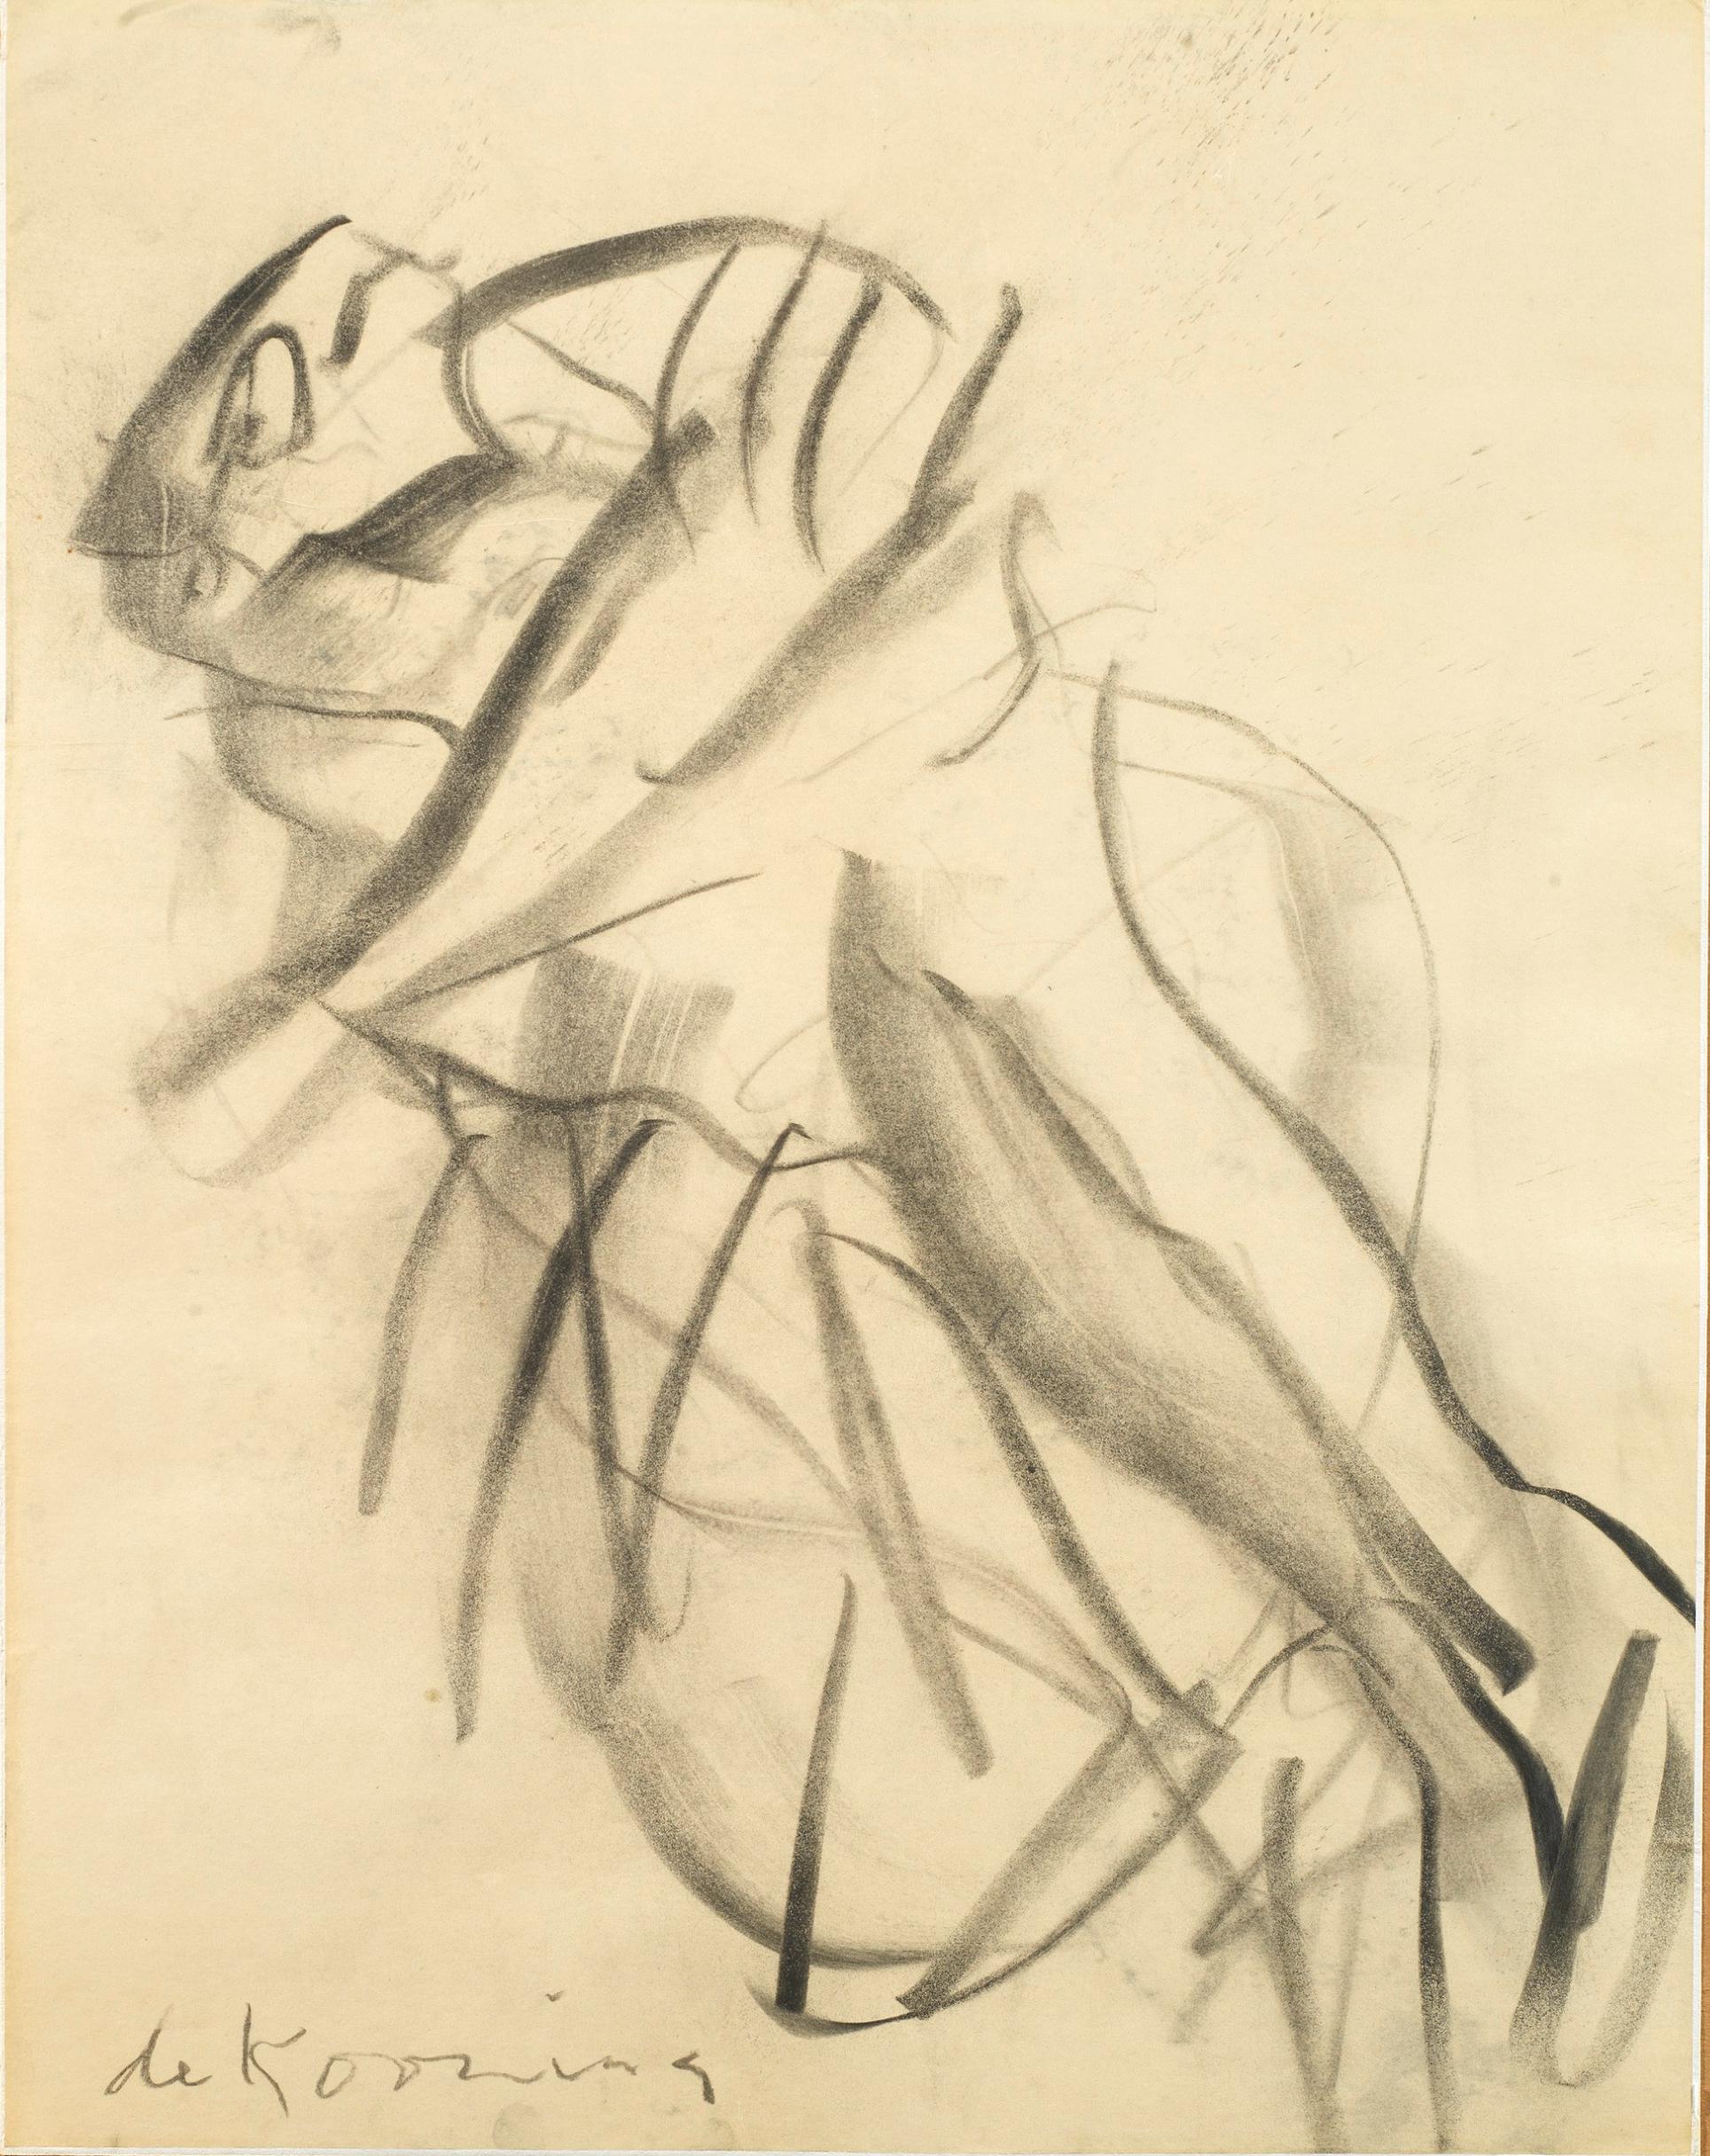 Willem de Kooning Figurative Art - Untitled - Contemporary, Charcoal, Abstract Expressionists, Mid 20th Century